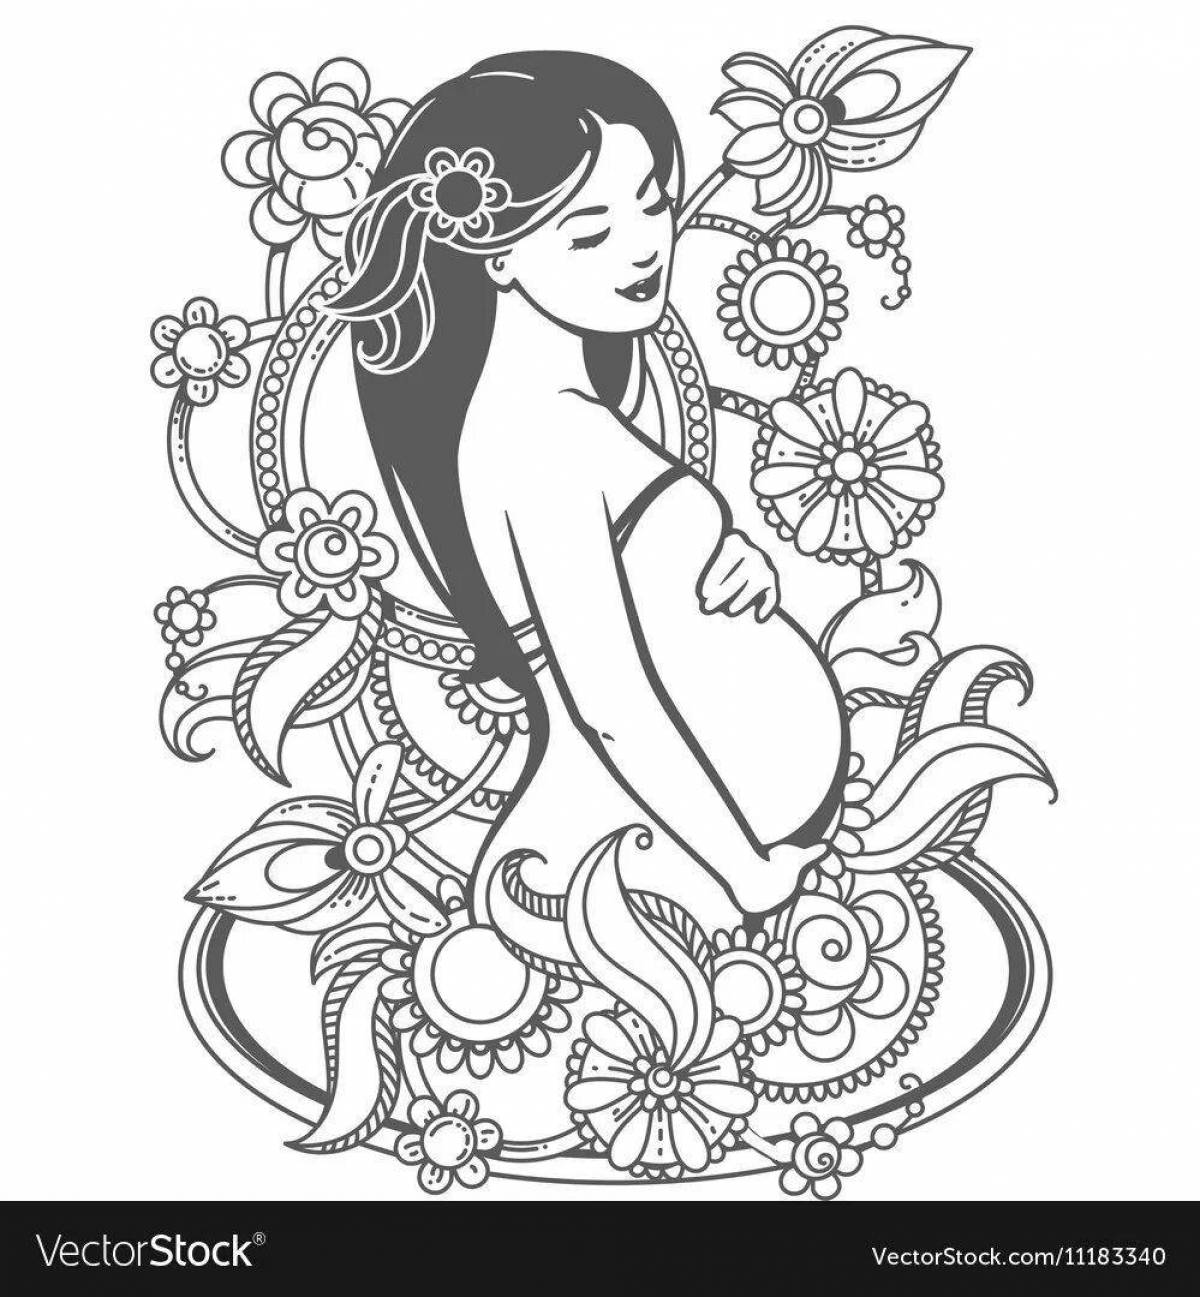 Exciting pregnancy coloring book